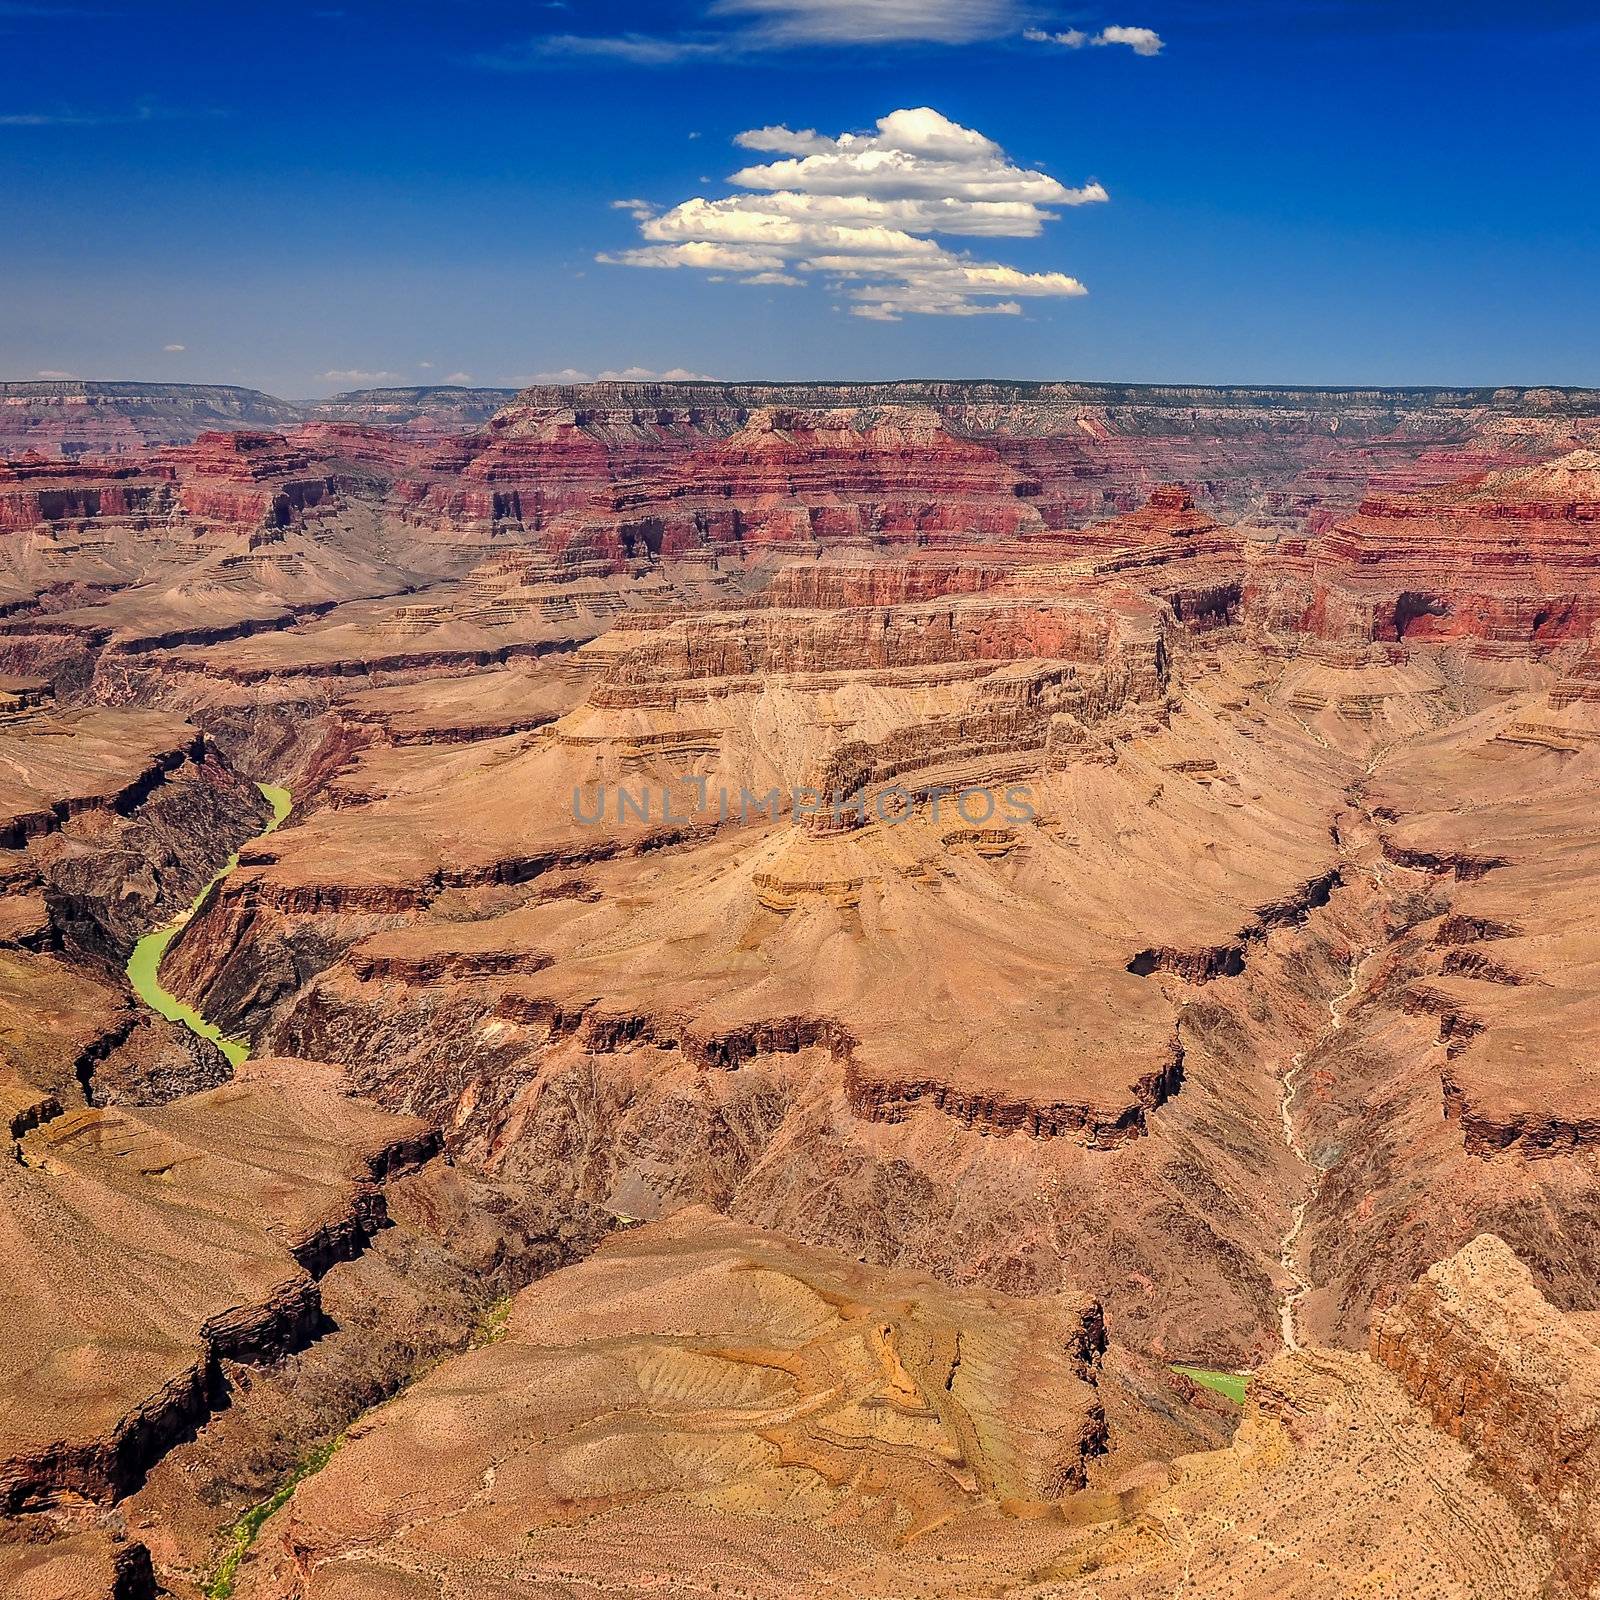 Grand canyon landscape view during sunny day with the blue sky and white clouds